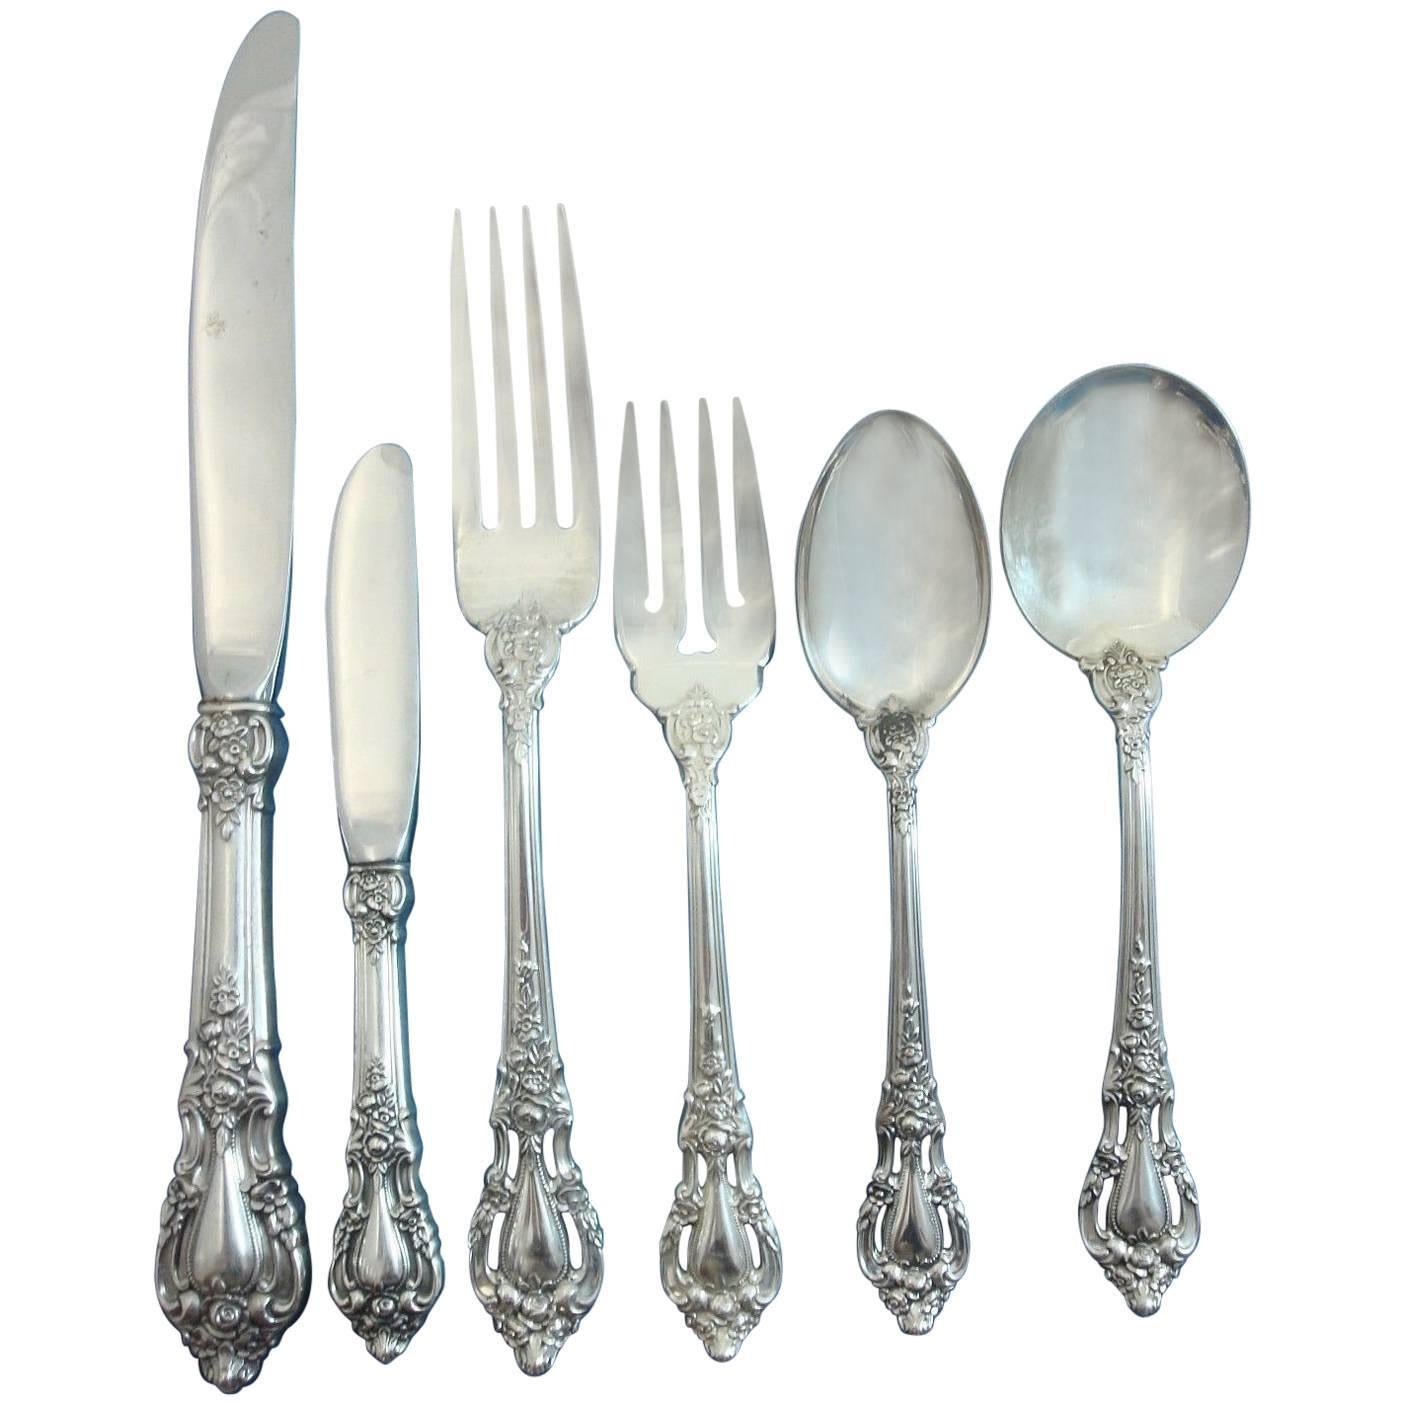 Eloquence by Lunt Sterling Silver Flatware Service Set 77 Pieces Dinner Size